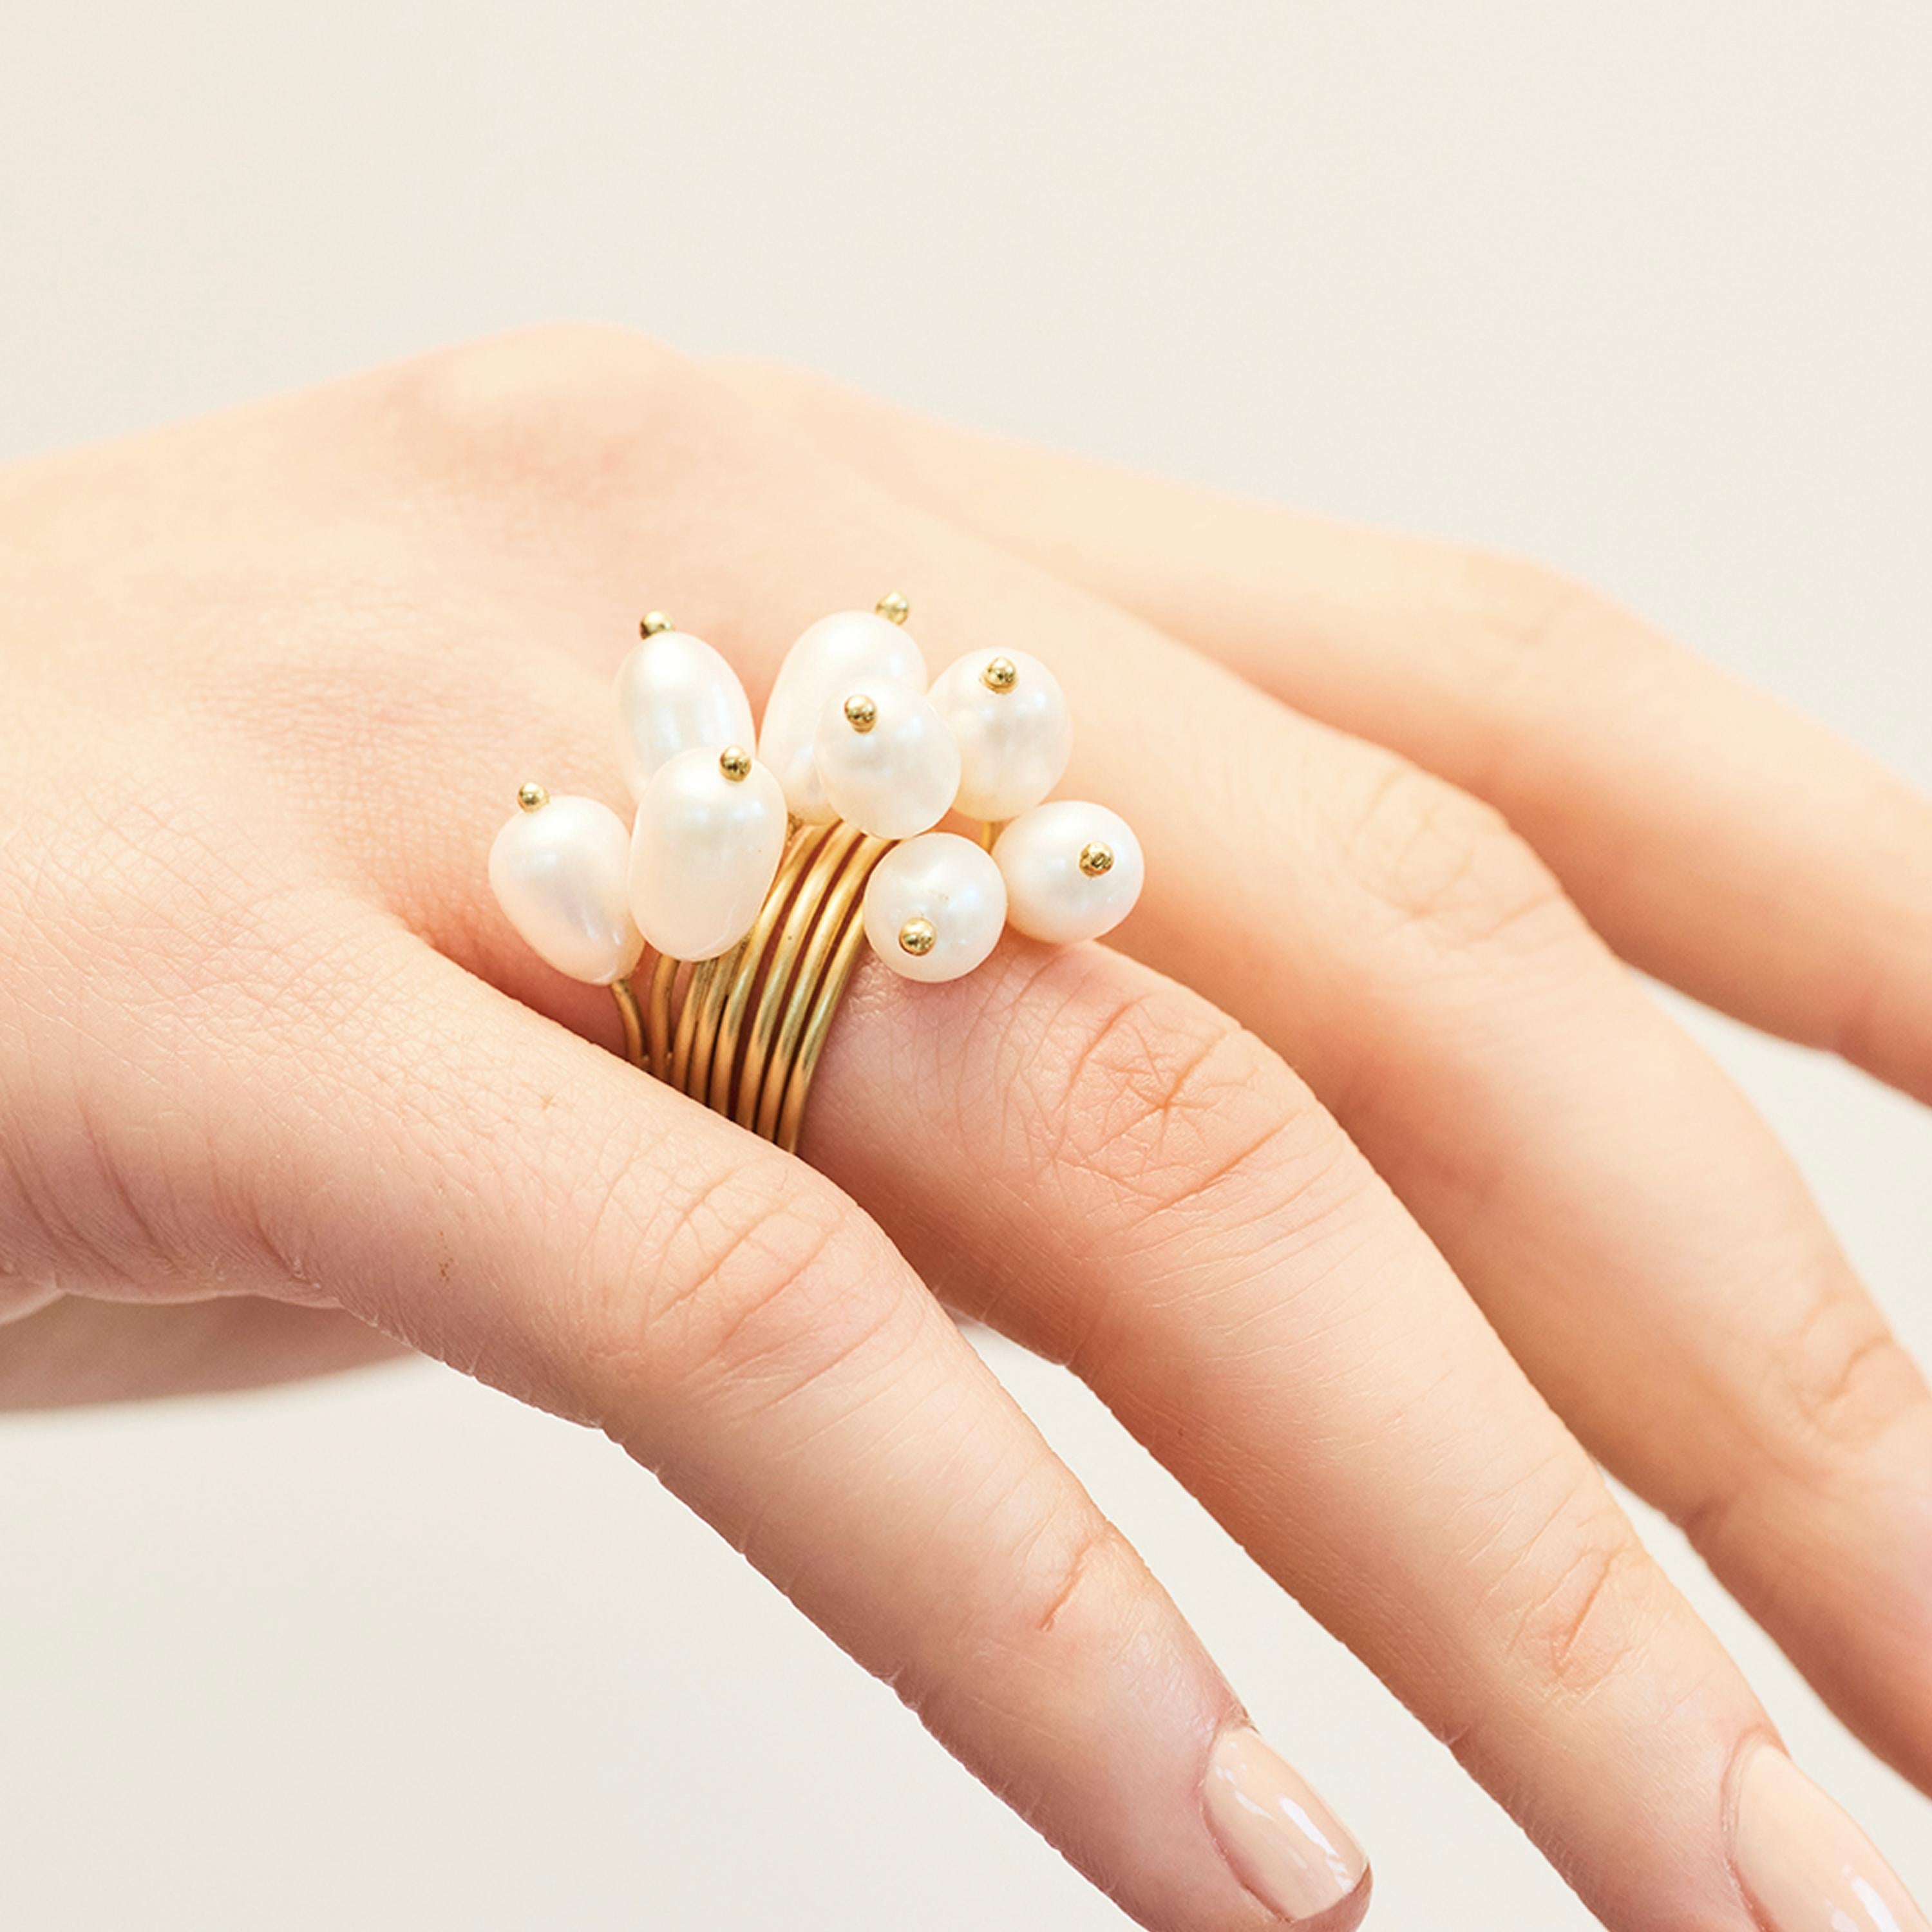 Ambroise Degenève’s Roseaux ring is created using freshwater pearls and Silver 750 (8g). The reeds-shaped pearls are beautifully presented on an elegant wire ring shank made from 18k karat yellow gold. Made to order, this piece takes between 6 and 8